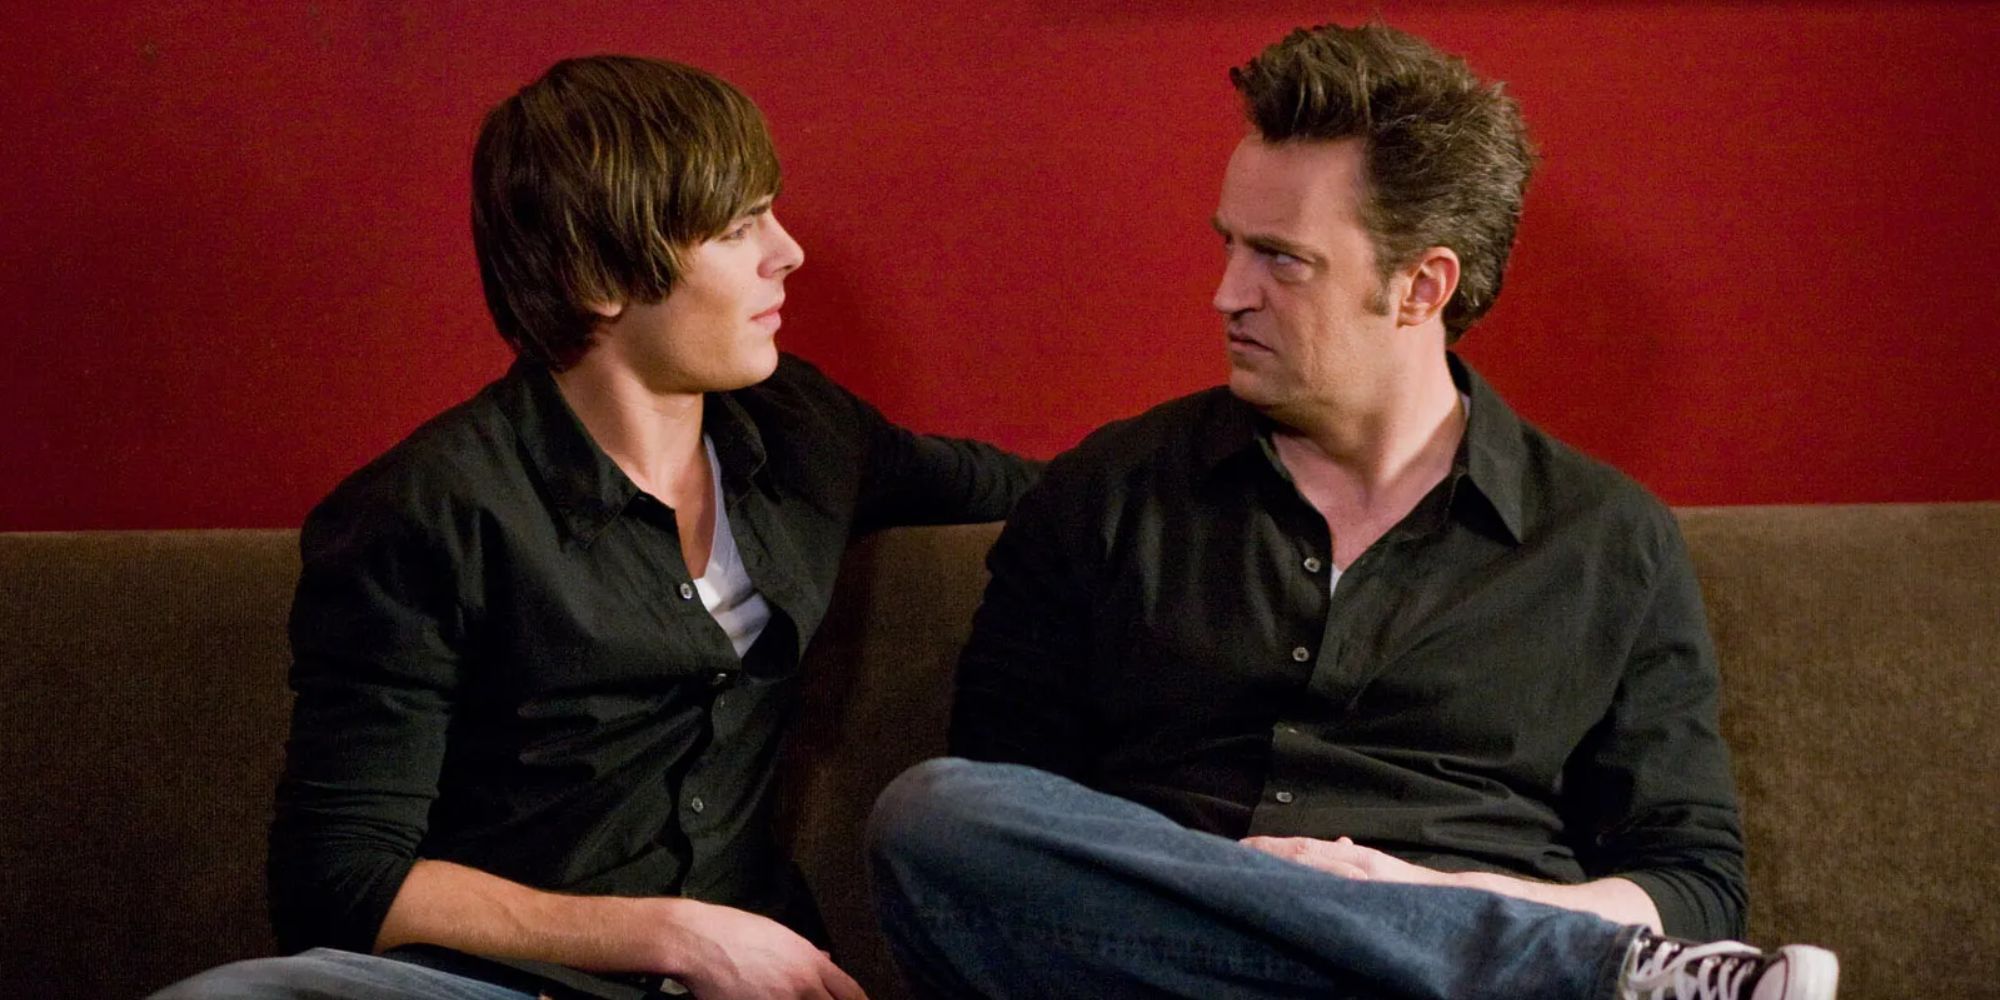 Zac Efron and Matthew Perry 17 Again